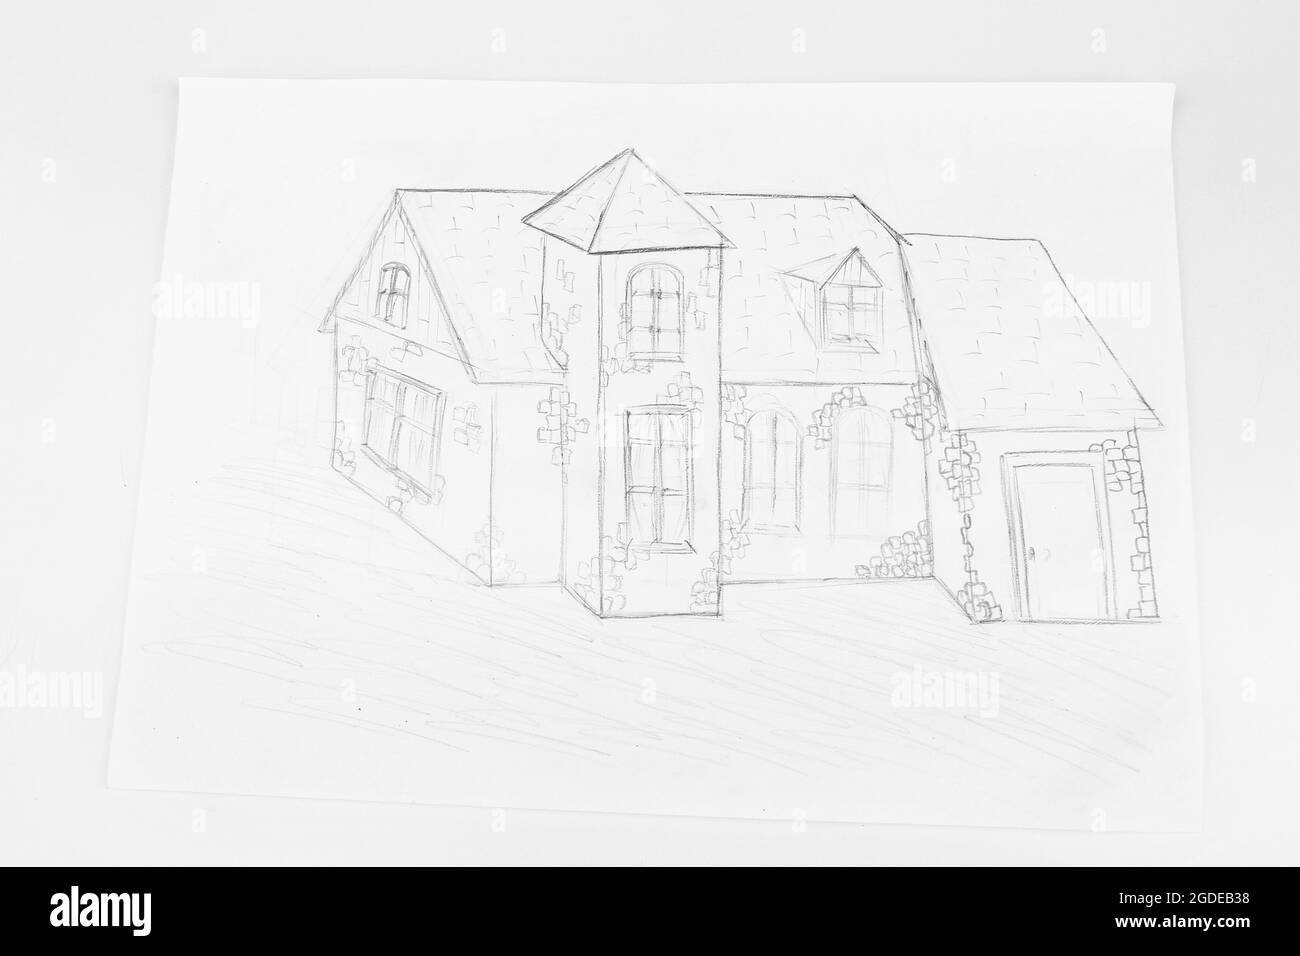 How To Draw A House: 10 Easy Drawing Projects